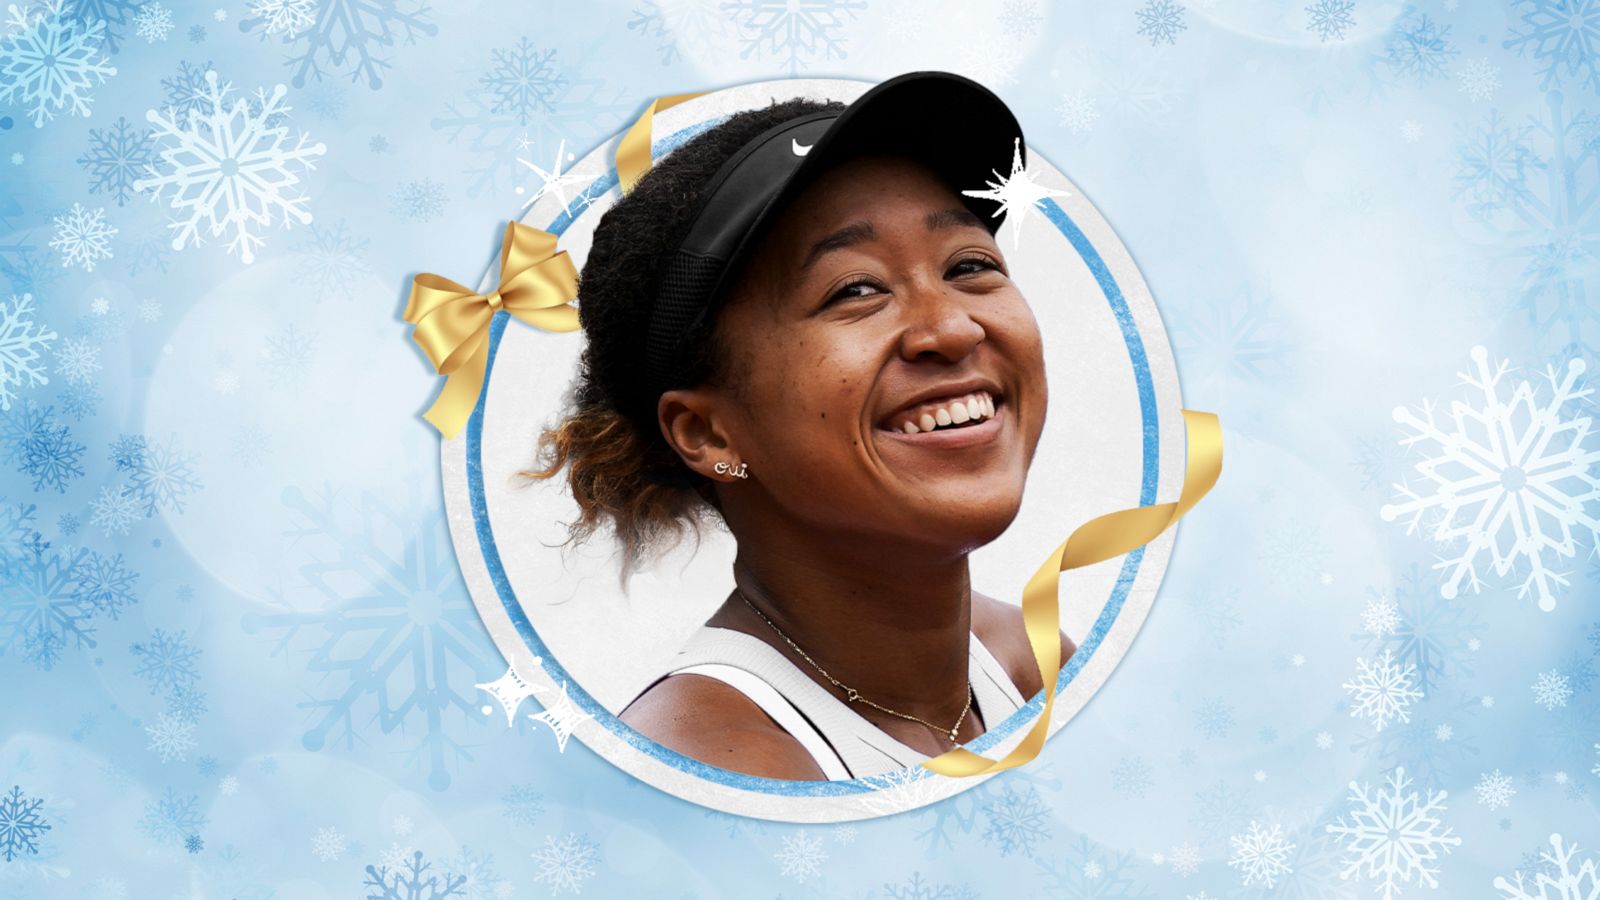 Naomi Osaka's Family: 5 Fast Facts You Need to Know